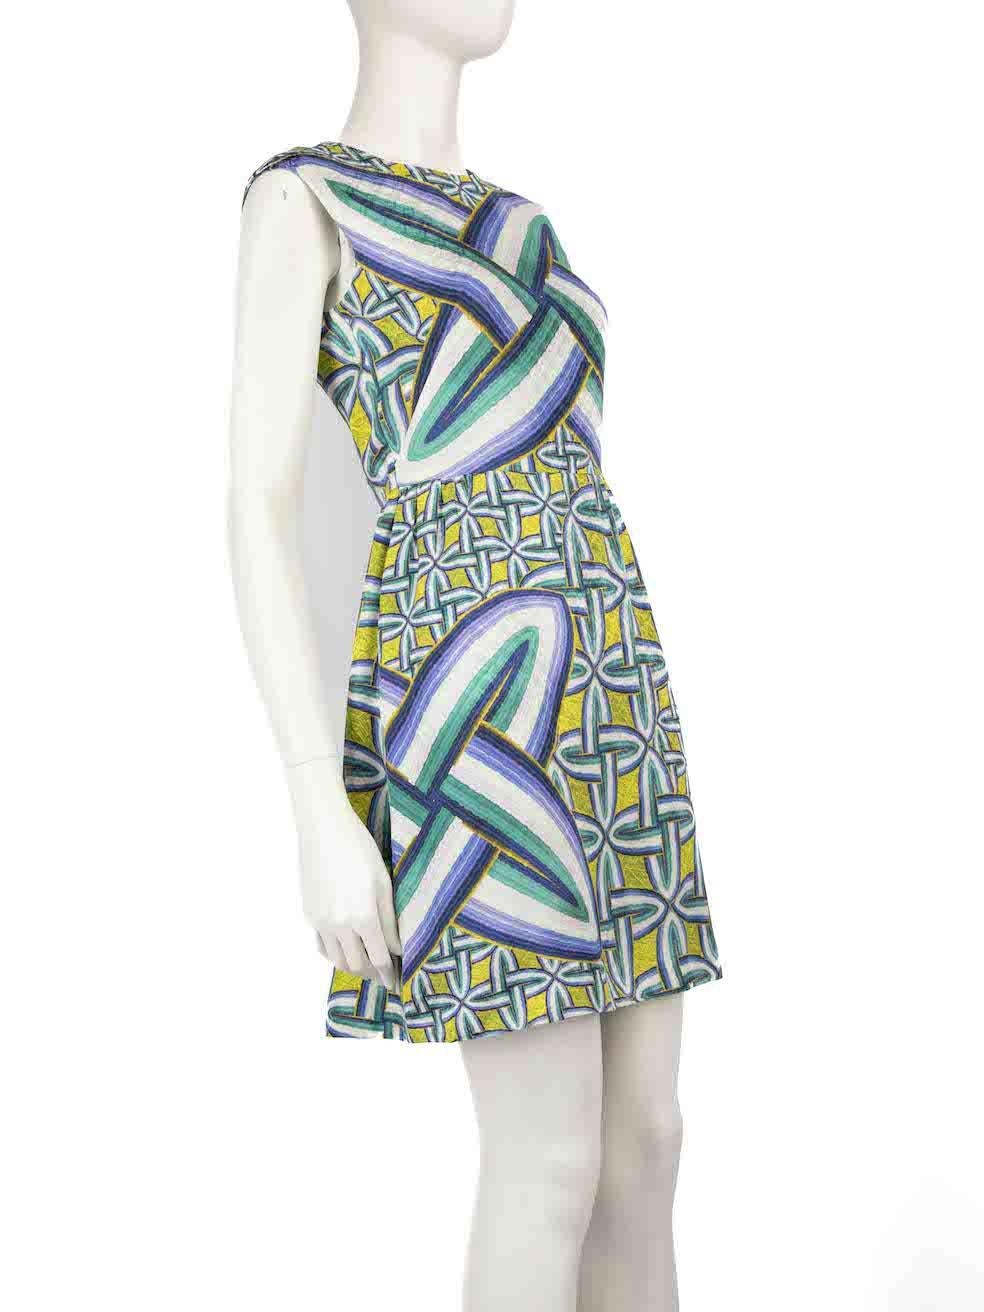 CONDITION is Very good. Hardly any visible wear to the dress is evident on this used Peter Pilotto designer resale item.
 
 
 
 Details
 
 
 Multicolour- blue, green, yellow
 
 Silk
 
 Dress
 
 Abstract pattern
 
 Sleeveless
 
 Round neck
 
 Back